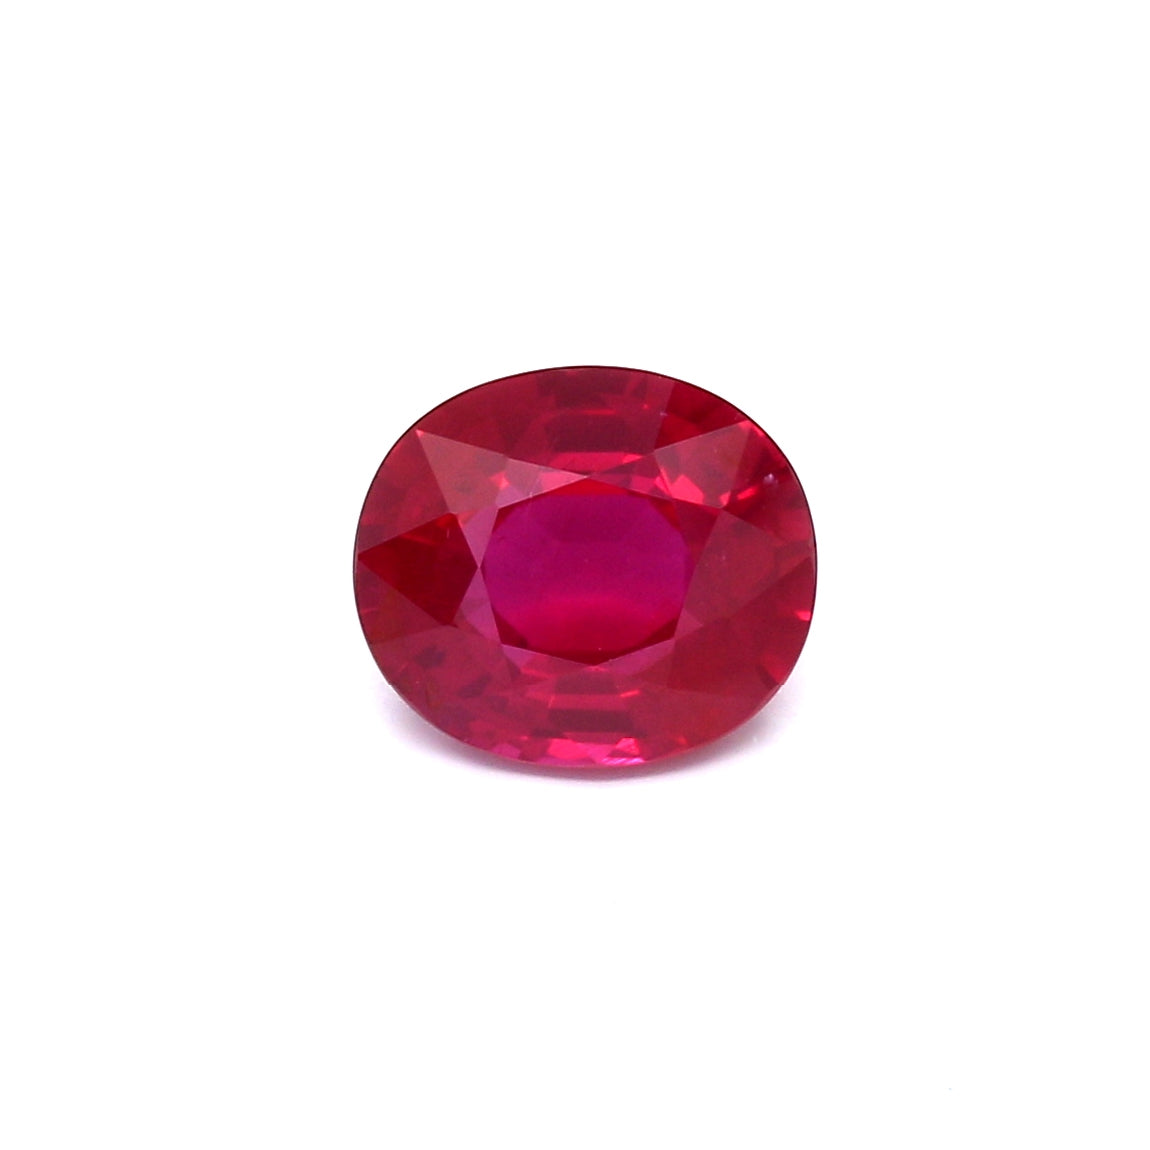 2.05ct Oval Ruby, Heated, Mozambique - 8.05 x 7.01 x 4.19mm